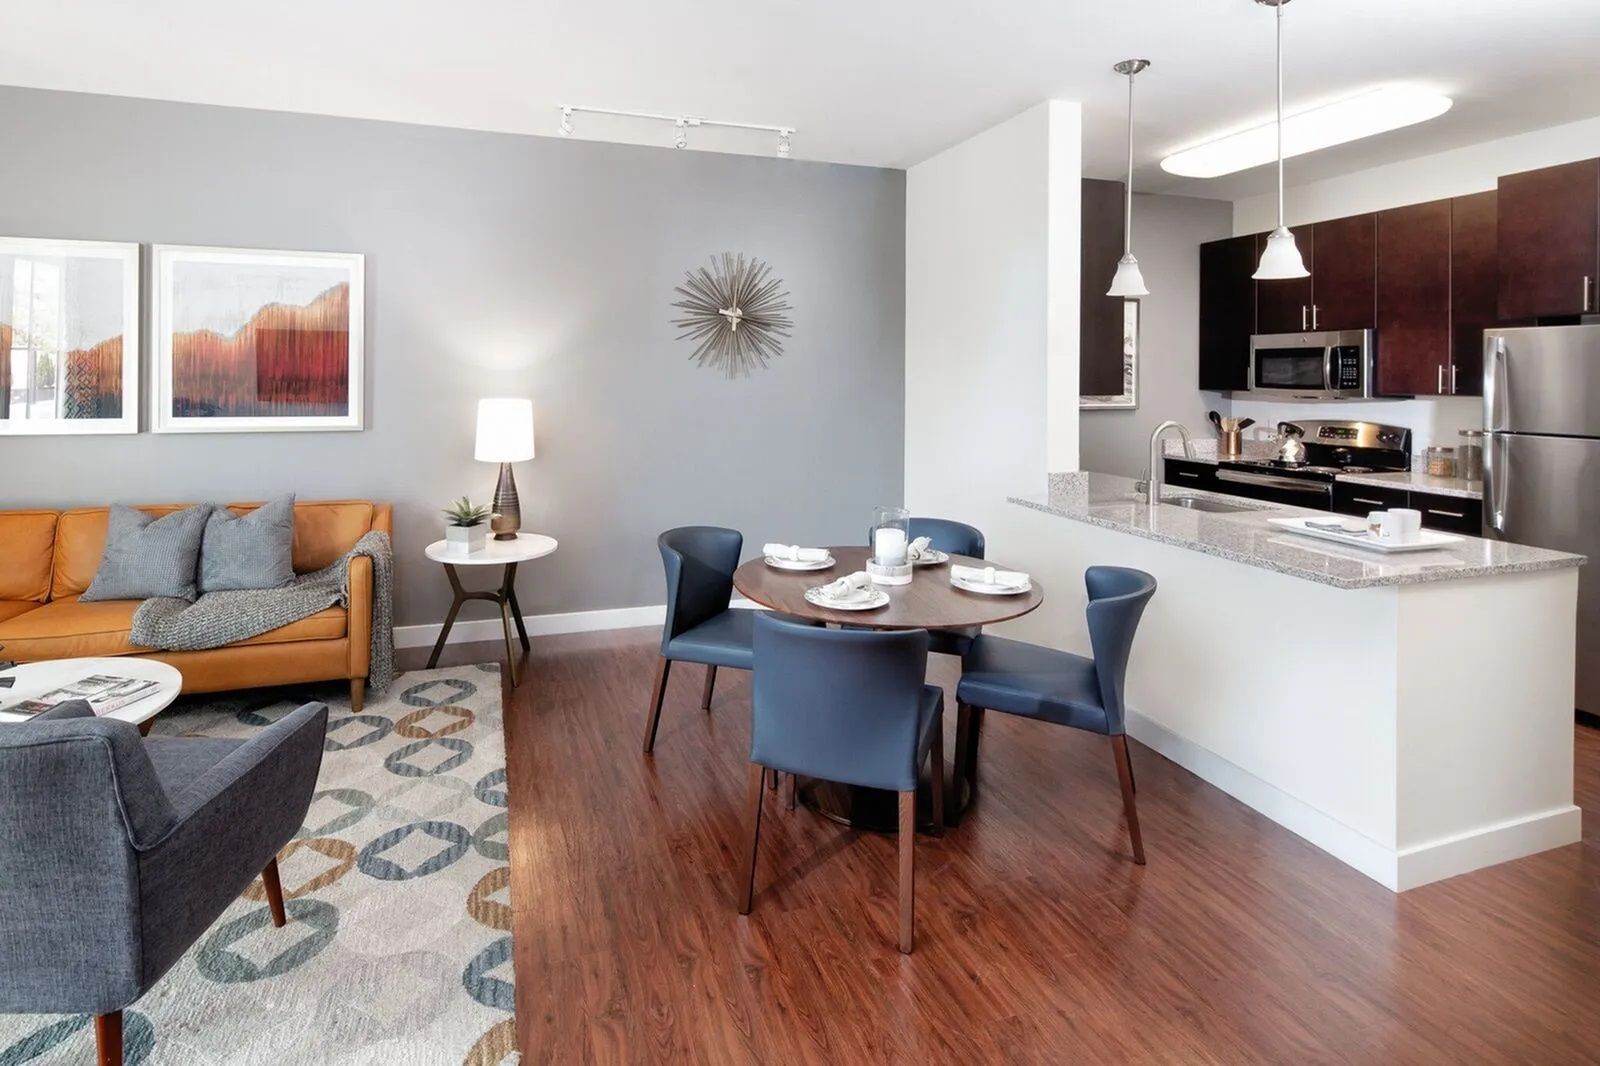 The Residences at Great Pond open floor plan layout with kitchen, dining area, and living room.